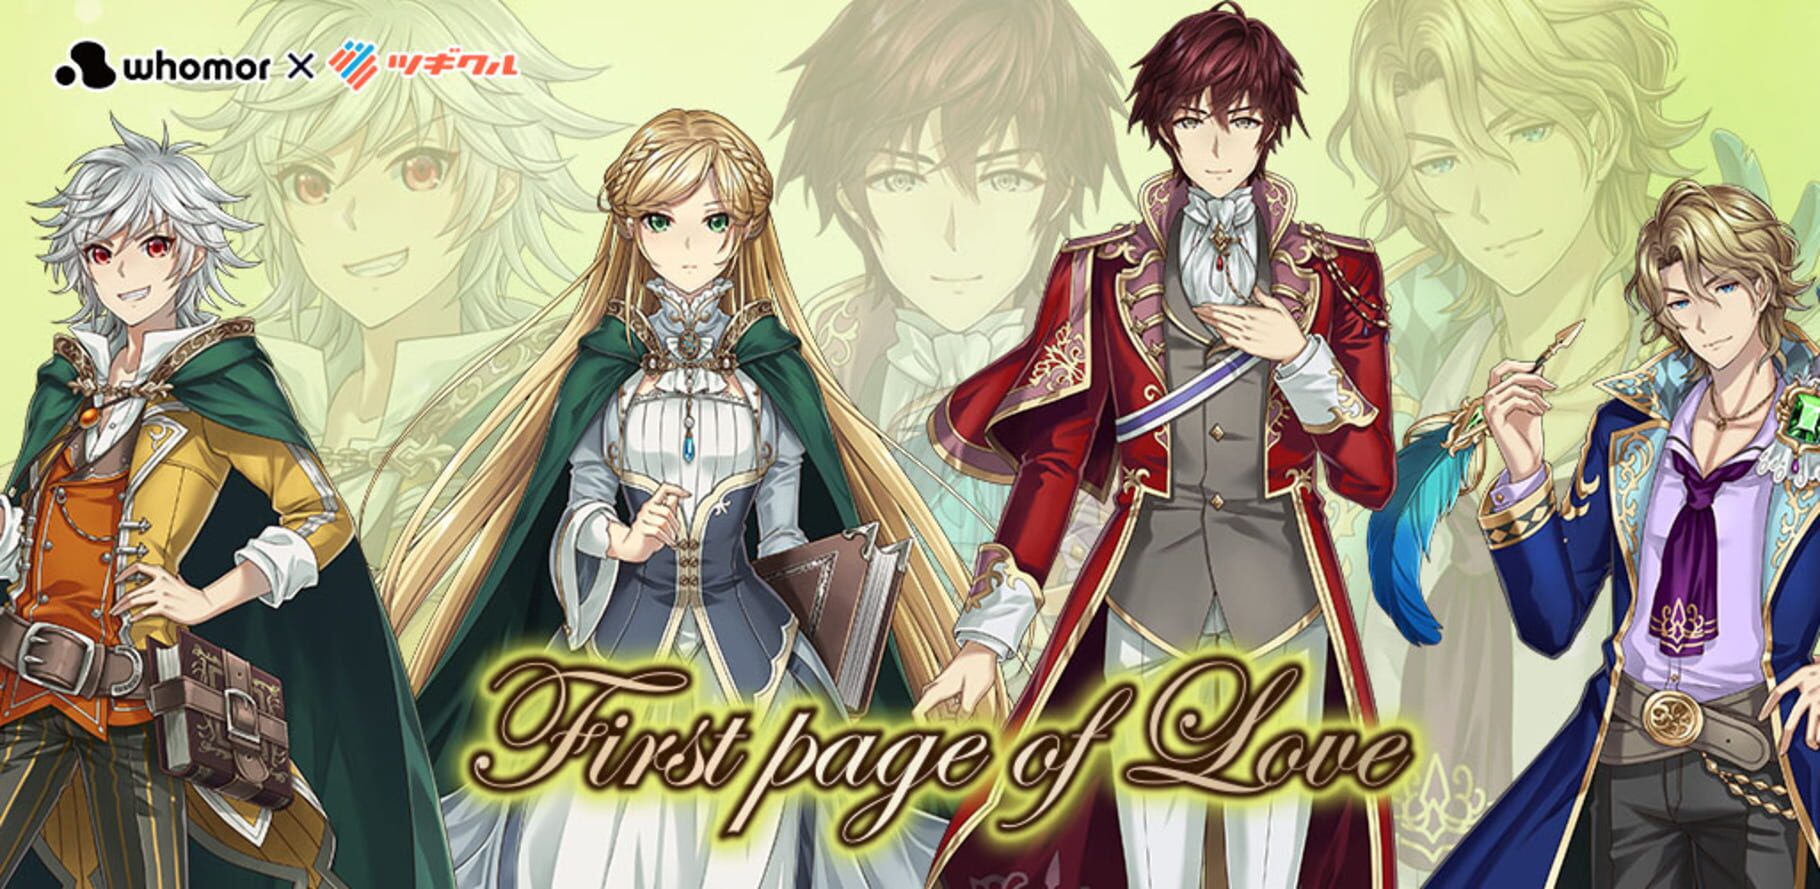 Otome game игры. Отомэ игра. For all time отоме. Merlin Отомэ игра. Отомэ игра про школьников.